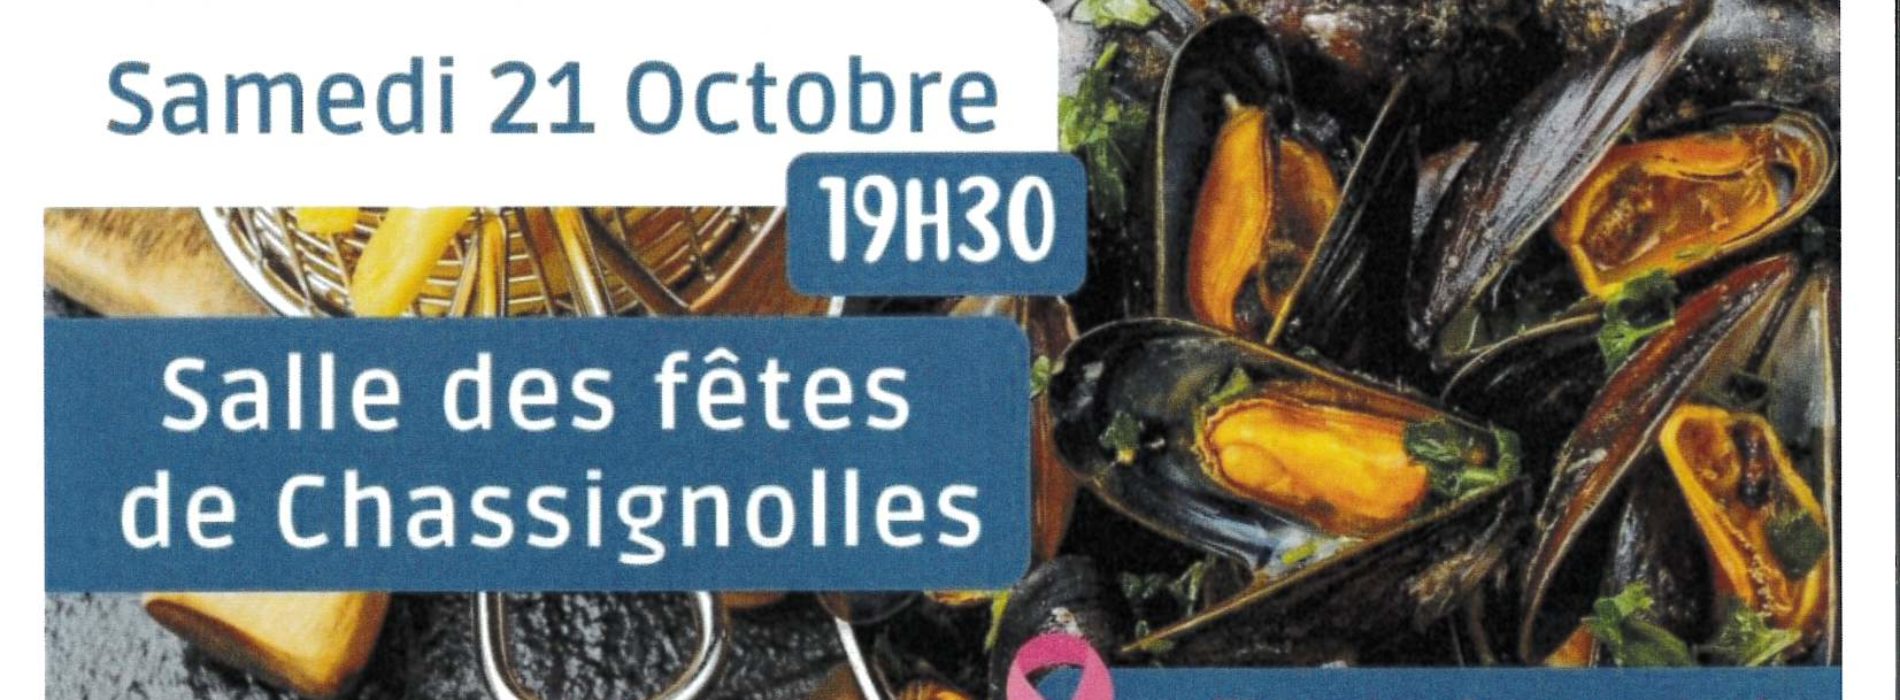 SOIREE MOULES FRITES SAMEDI 21 OCTOBRE A CHASSIGNOLLES